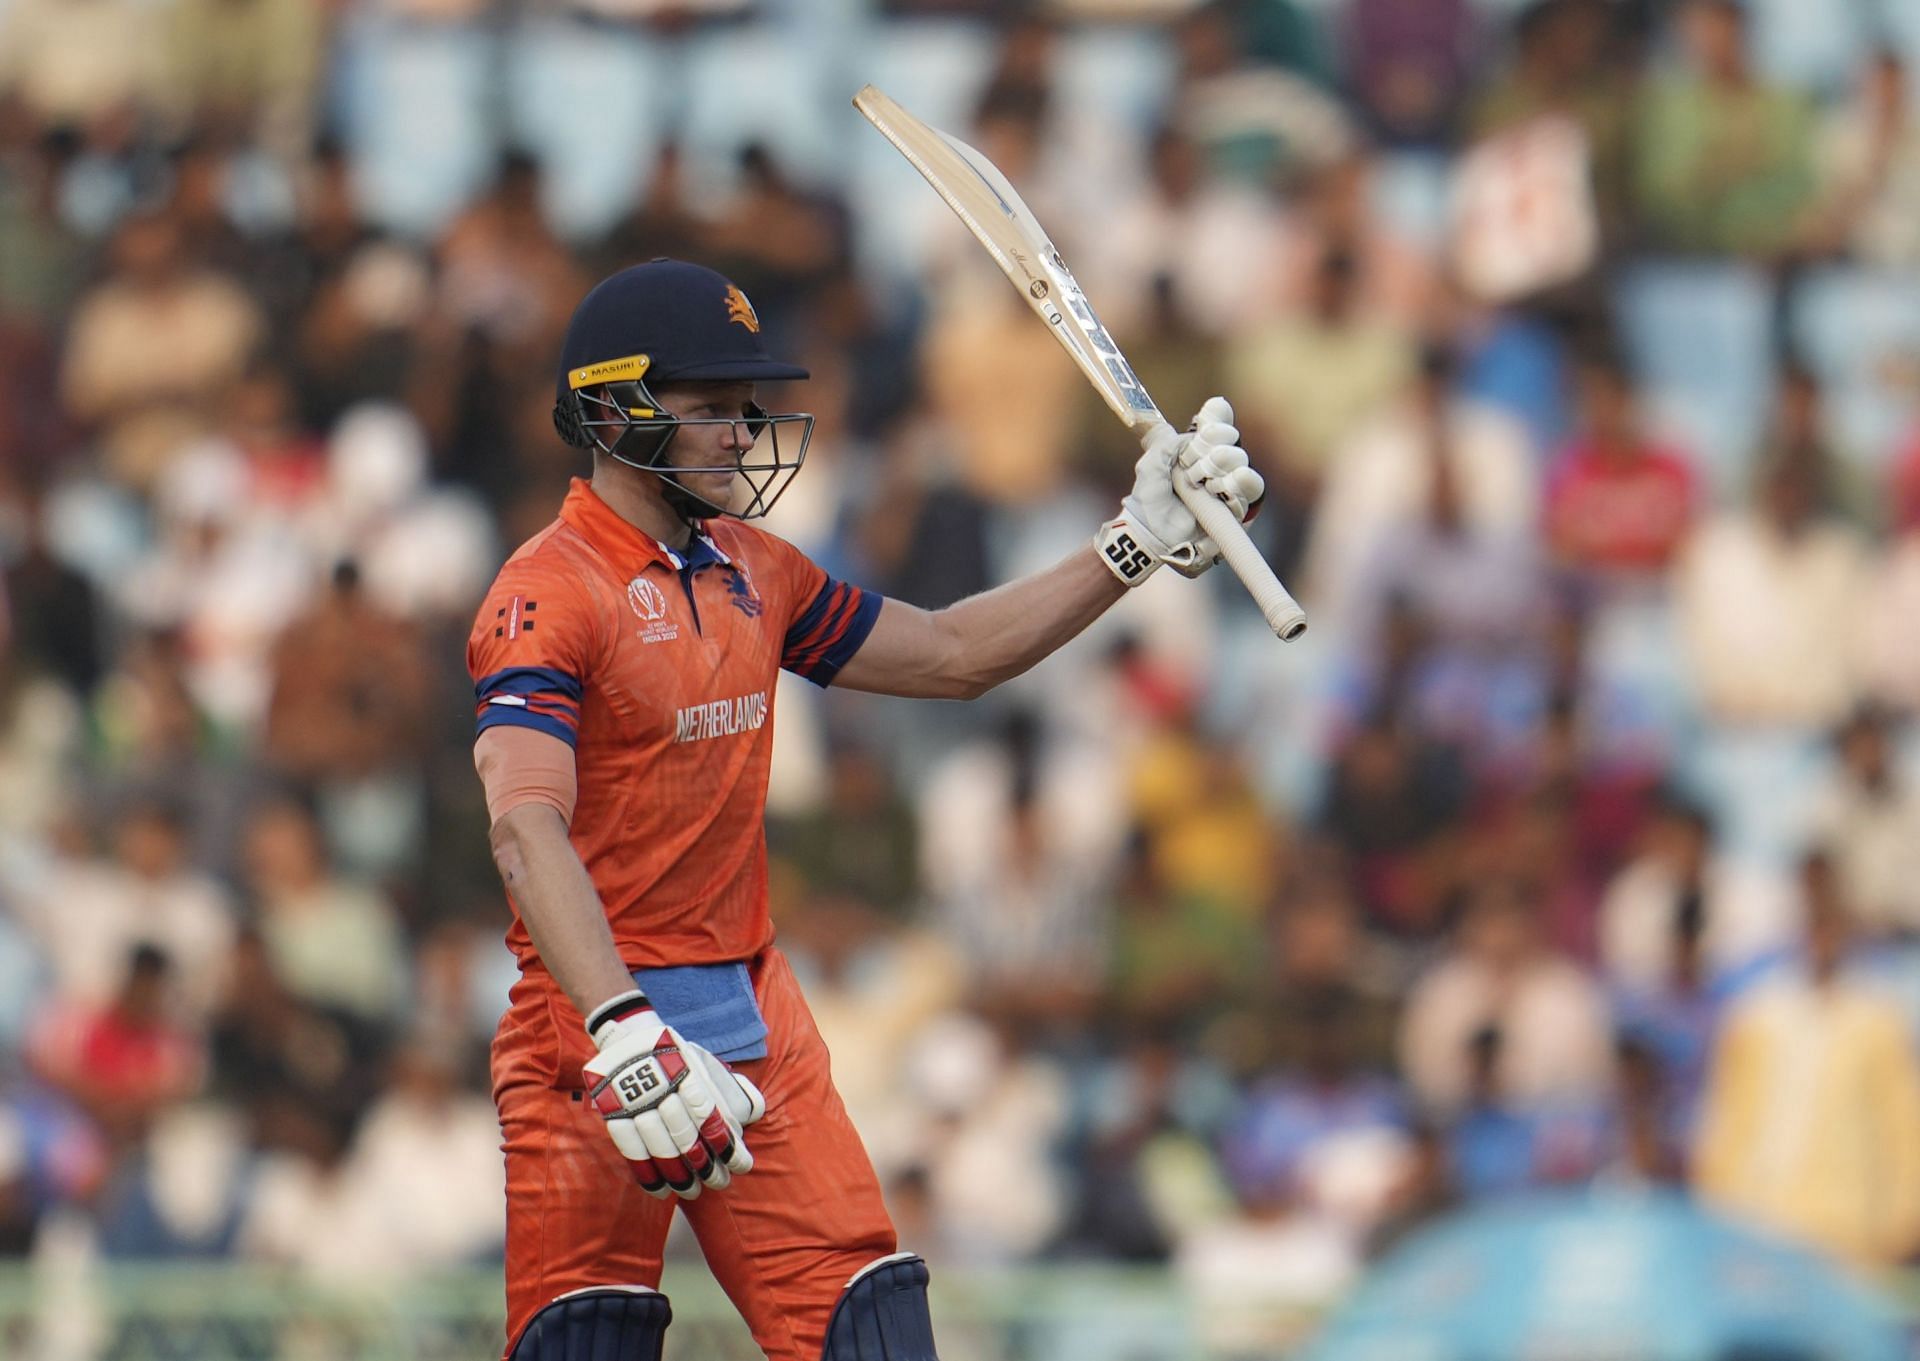 Sybrand Engelbrecht is the Netherlands&#039; top run-getter in the ongoing World Cup. [P/C: AP]